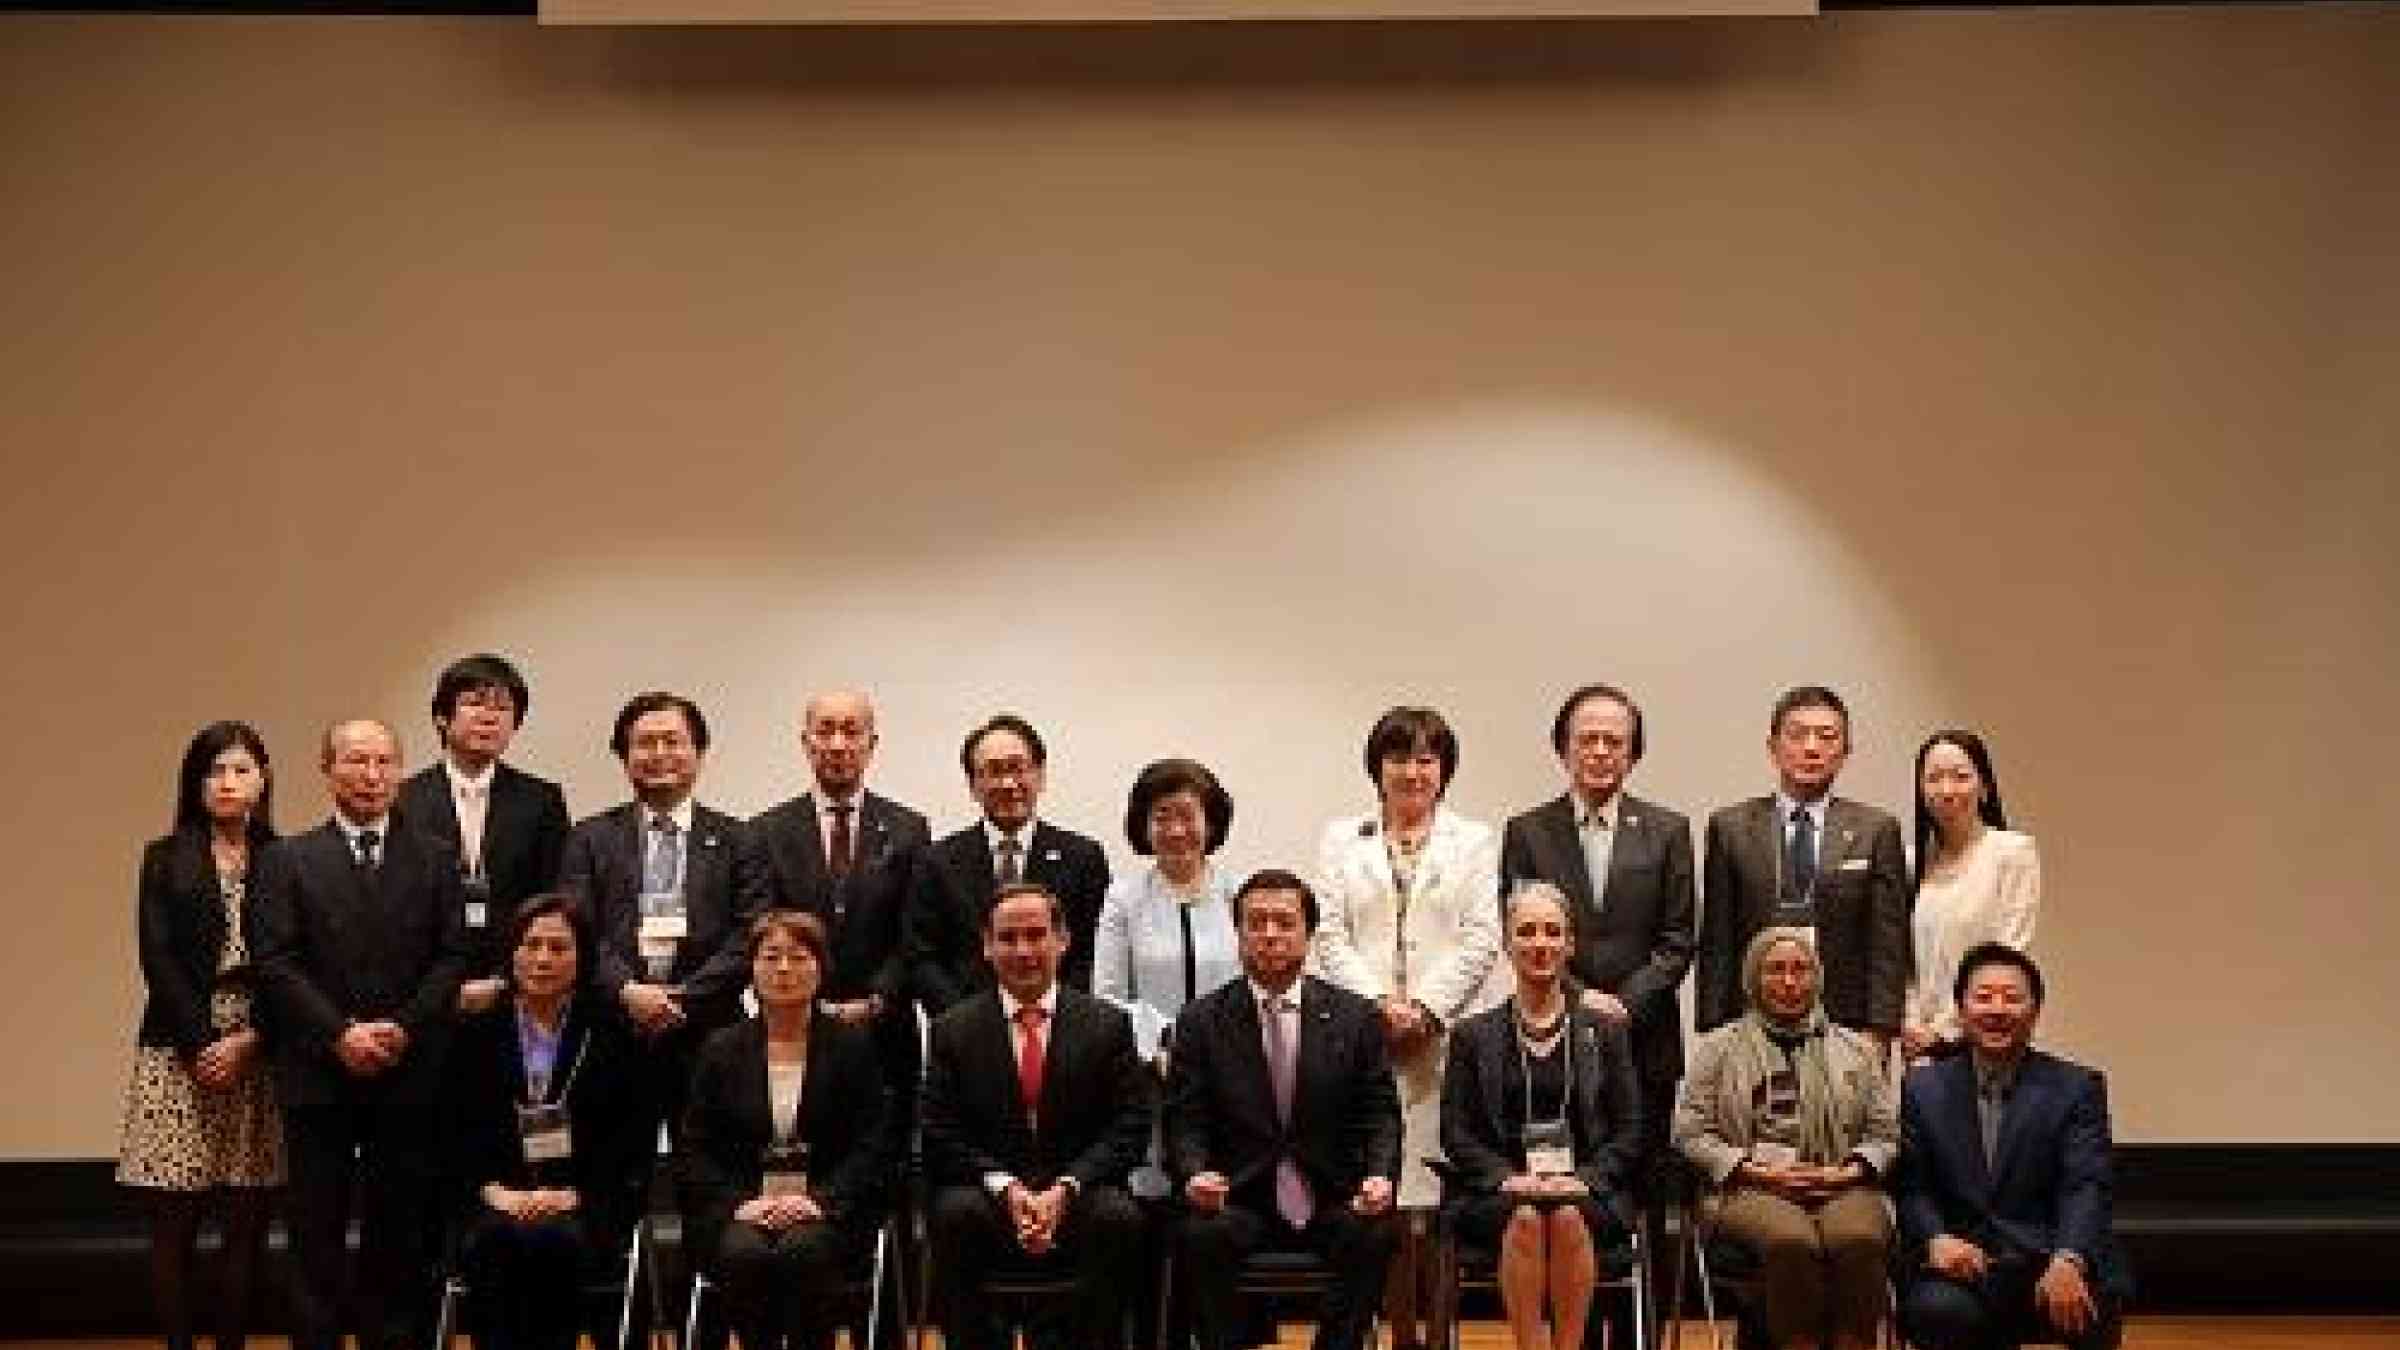 Group photo of participants at the 2nd World Tsunami Museum Conference